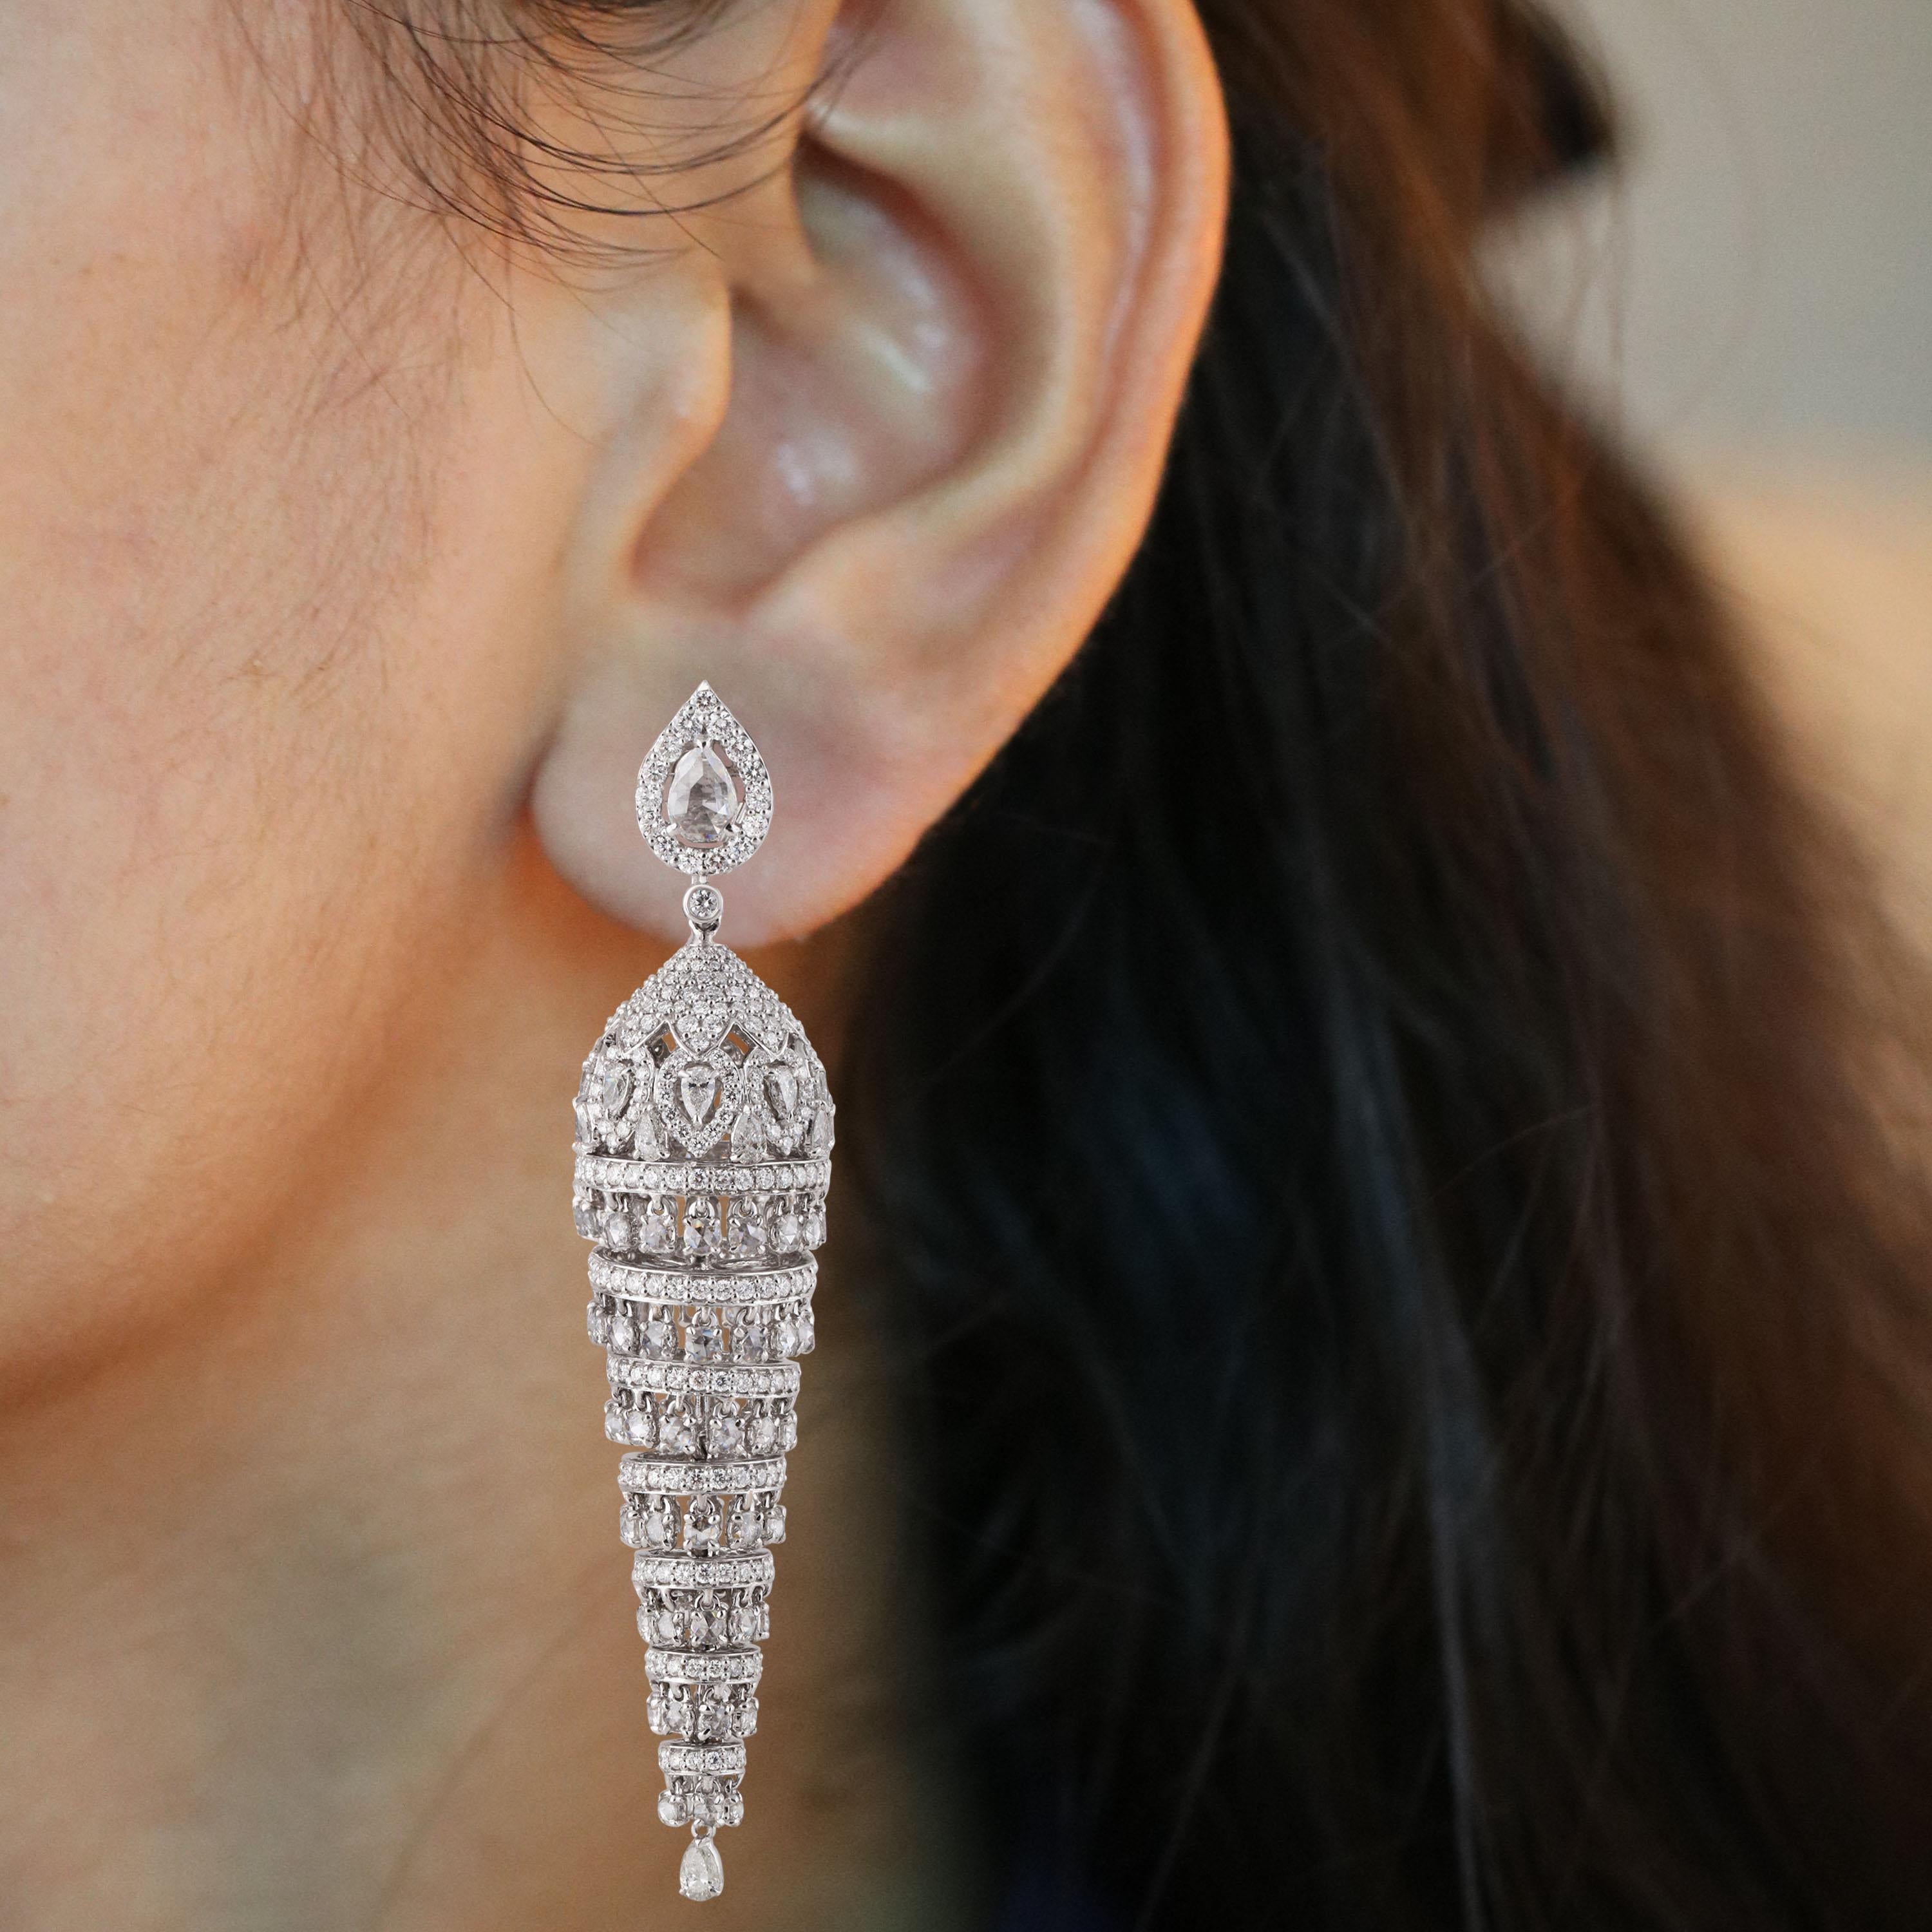 Gross Weight: 42.53 Grams
Diamond Weight: 13.67 cts
IGI Certified: Summary No.: 32J177781911

Video of the product can be shared upon request.

The whorls of these diamond chandelier earrings draw you in like a tornado. 8 tiers of round brilliant